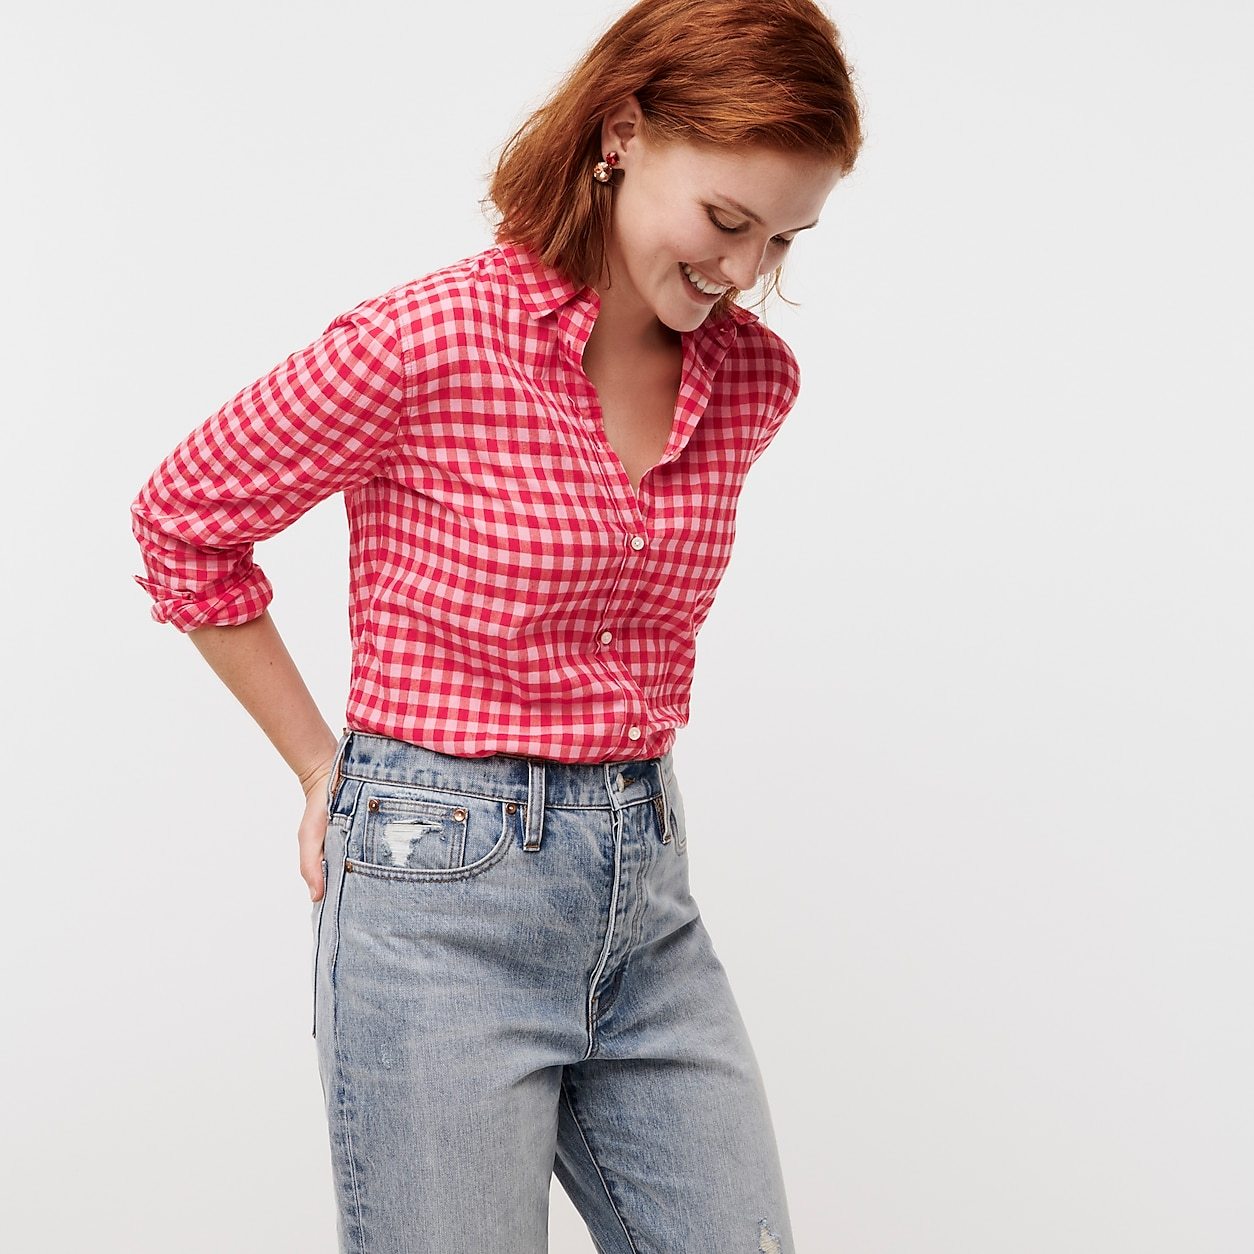 Classic-fit boy shirt in crinkle gingham